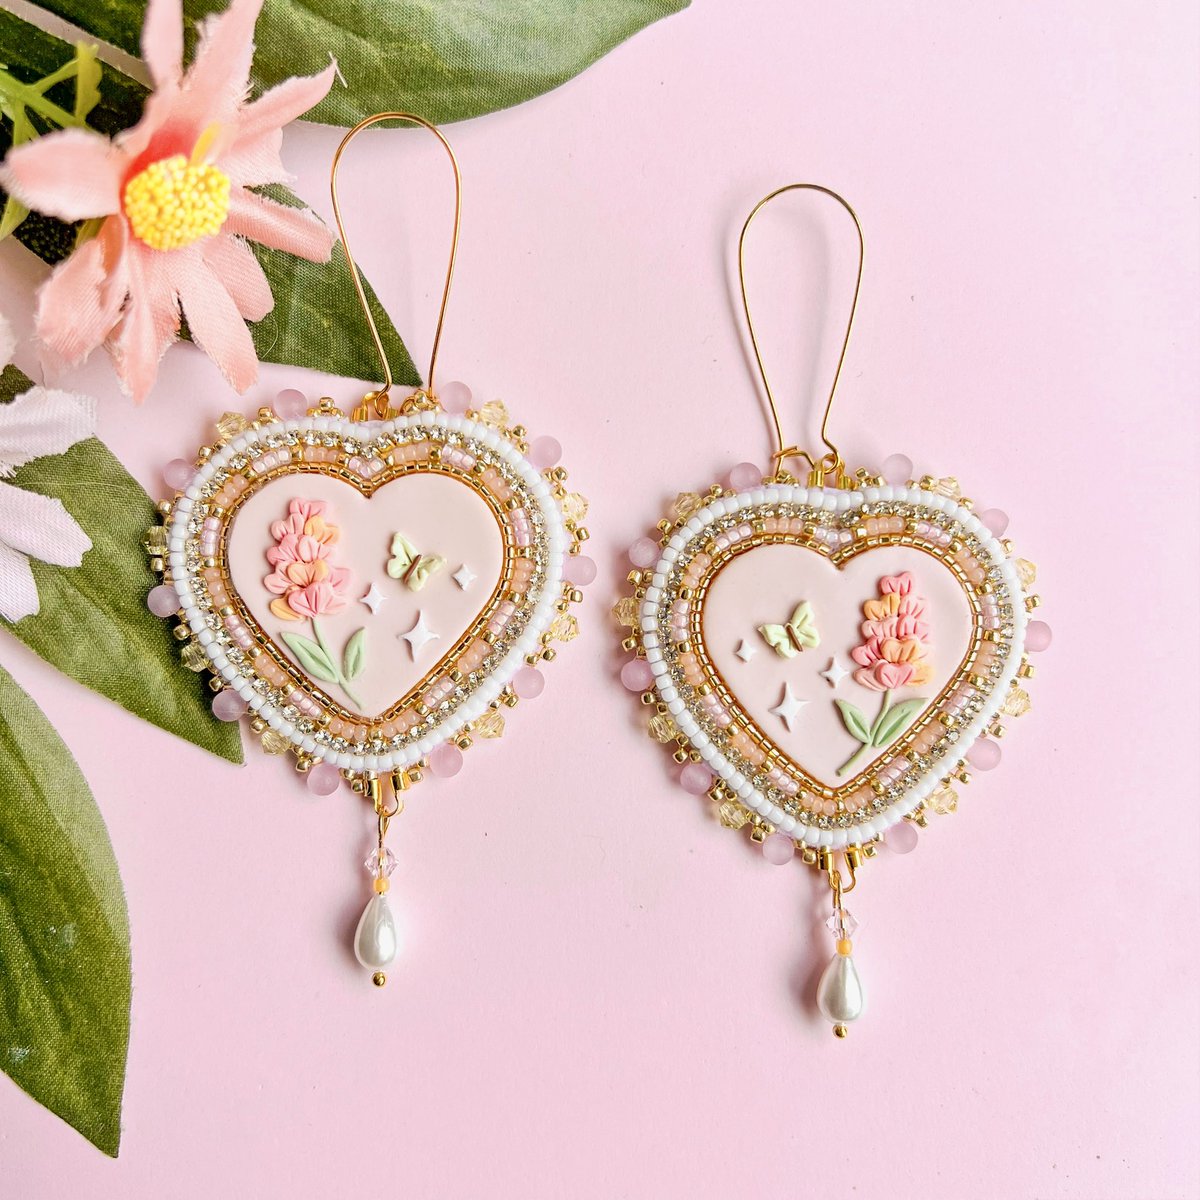 ✨ NOW AVAILABLE ✨

butterfly bloom beaded earrings 🦋🌸